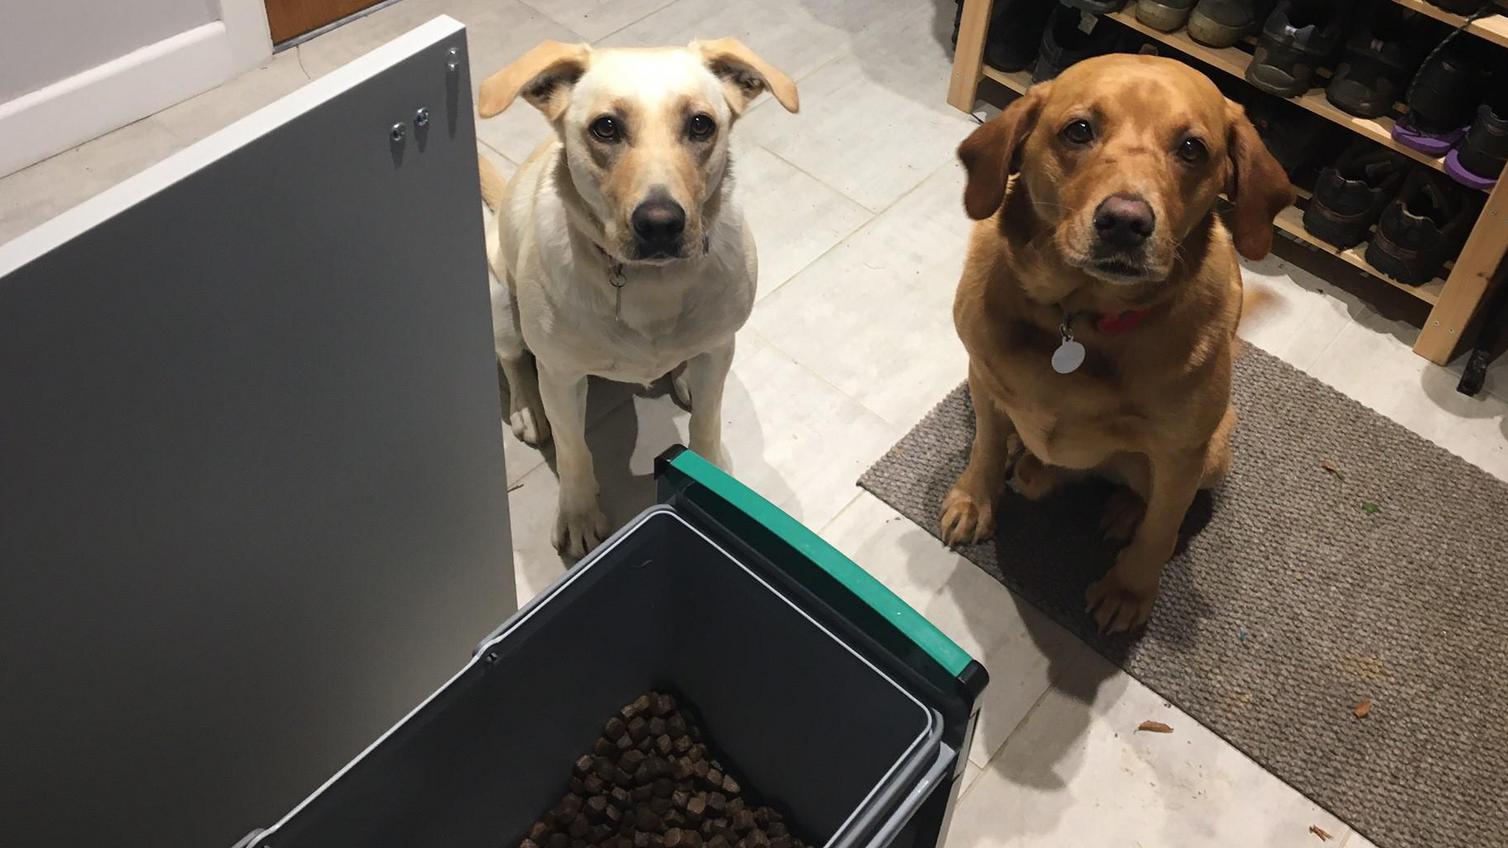 Two dogs in a pet-friendly kitchen which uses kitchen bins to store dog food for smart pet storage.